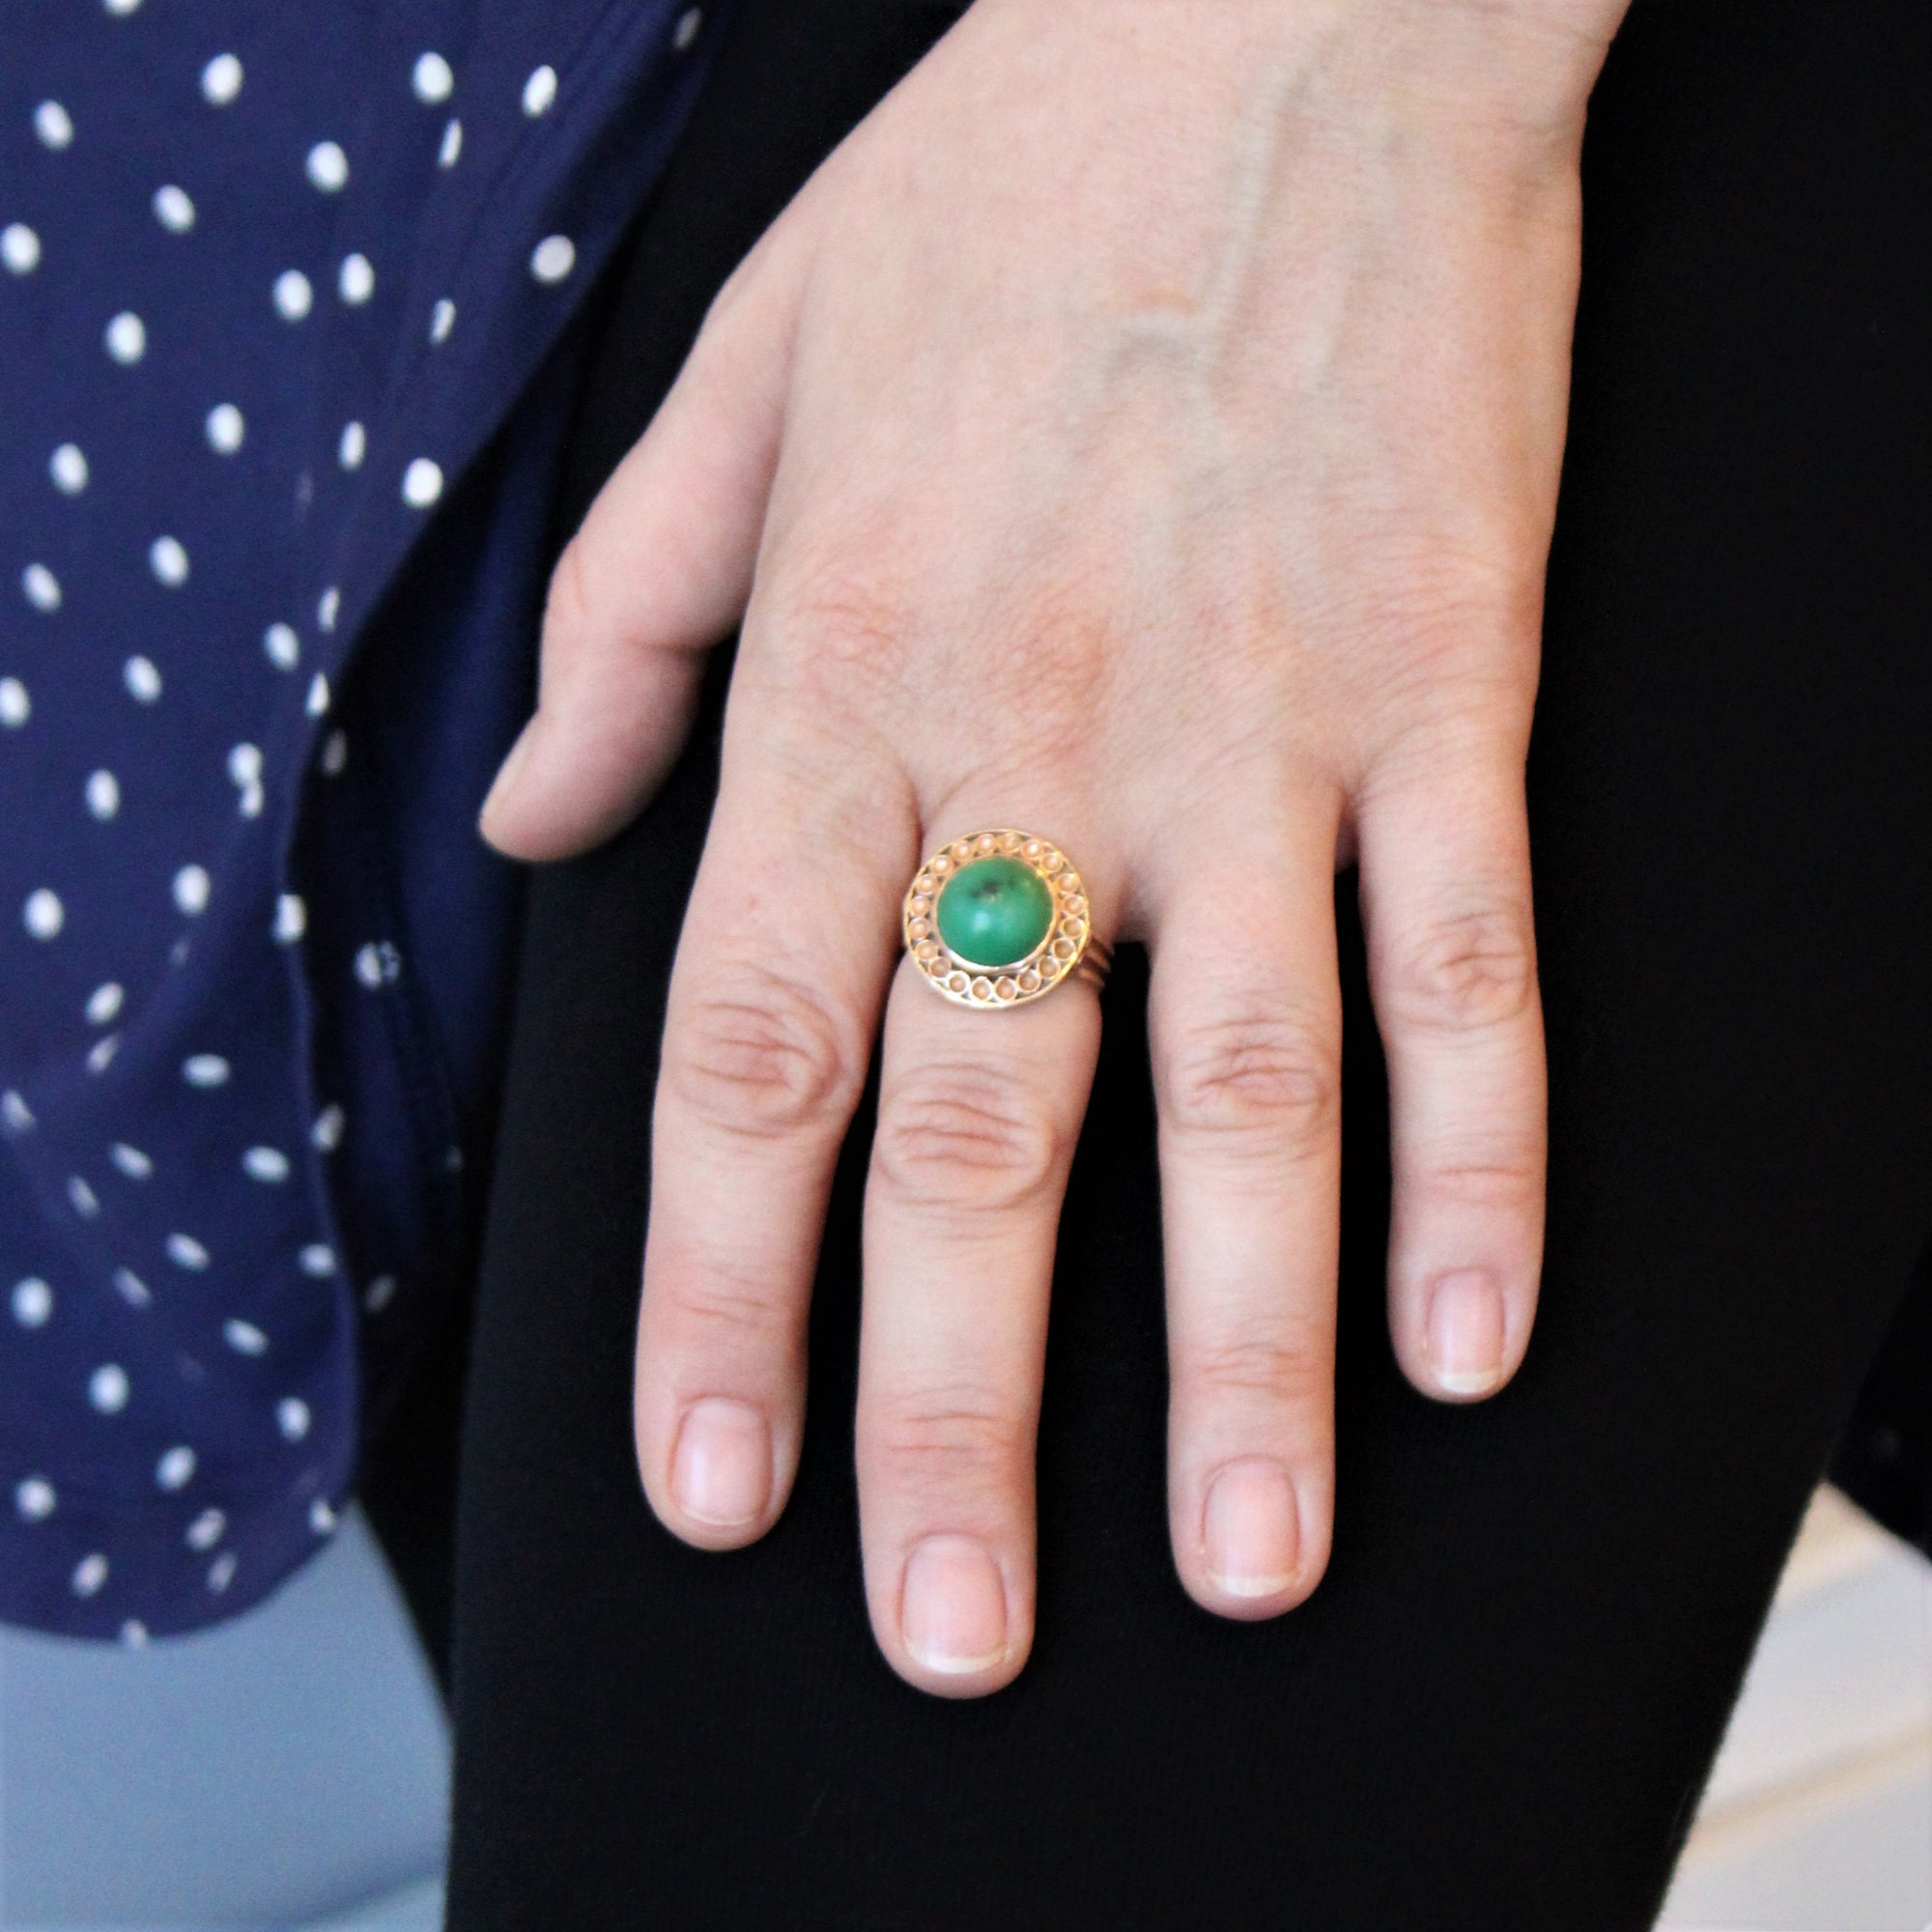 Green Turquoise Cocktail Ring | 4.50ct | SZ 7.75 |